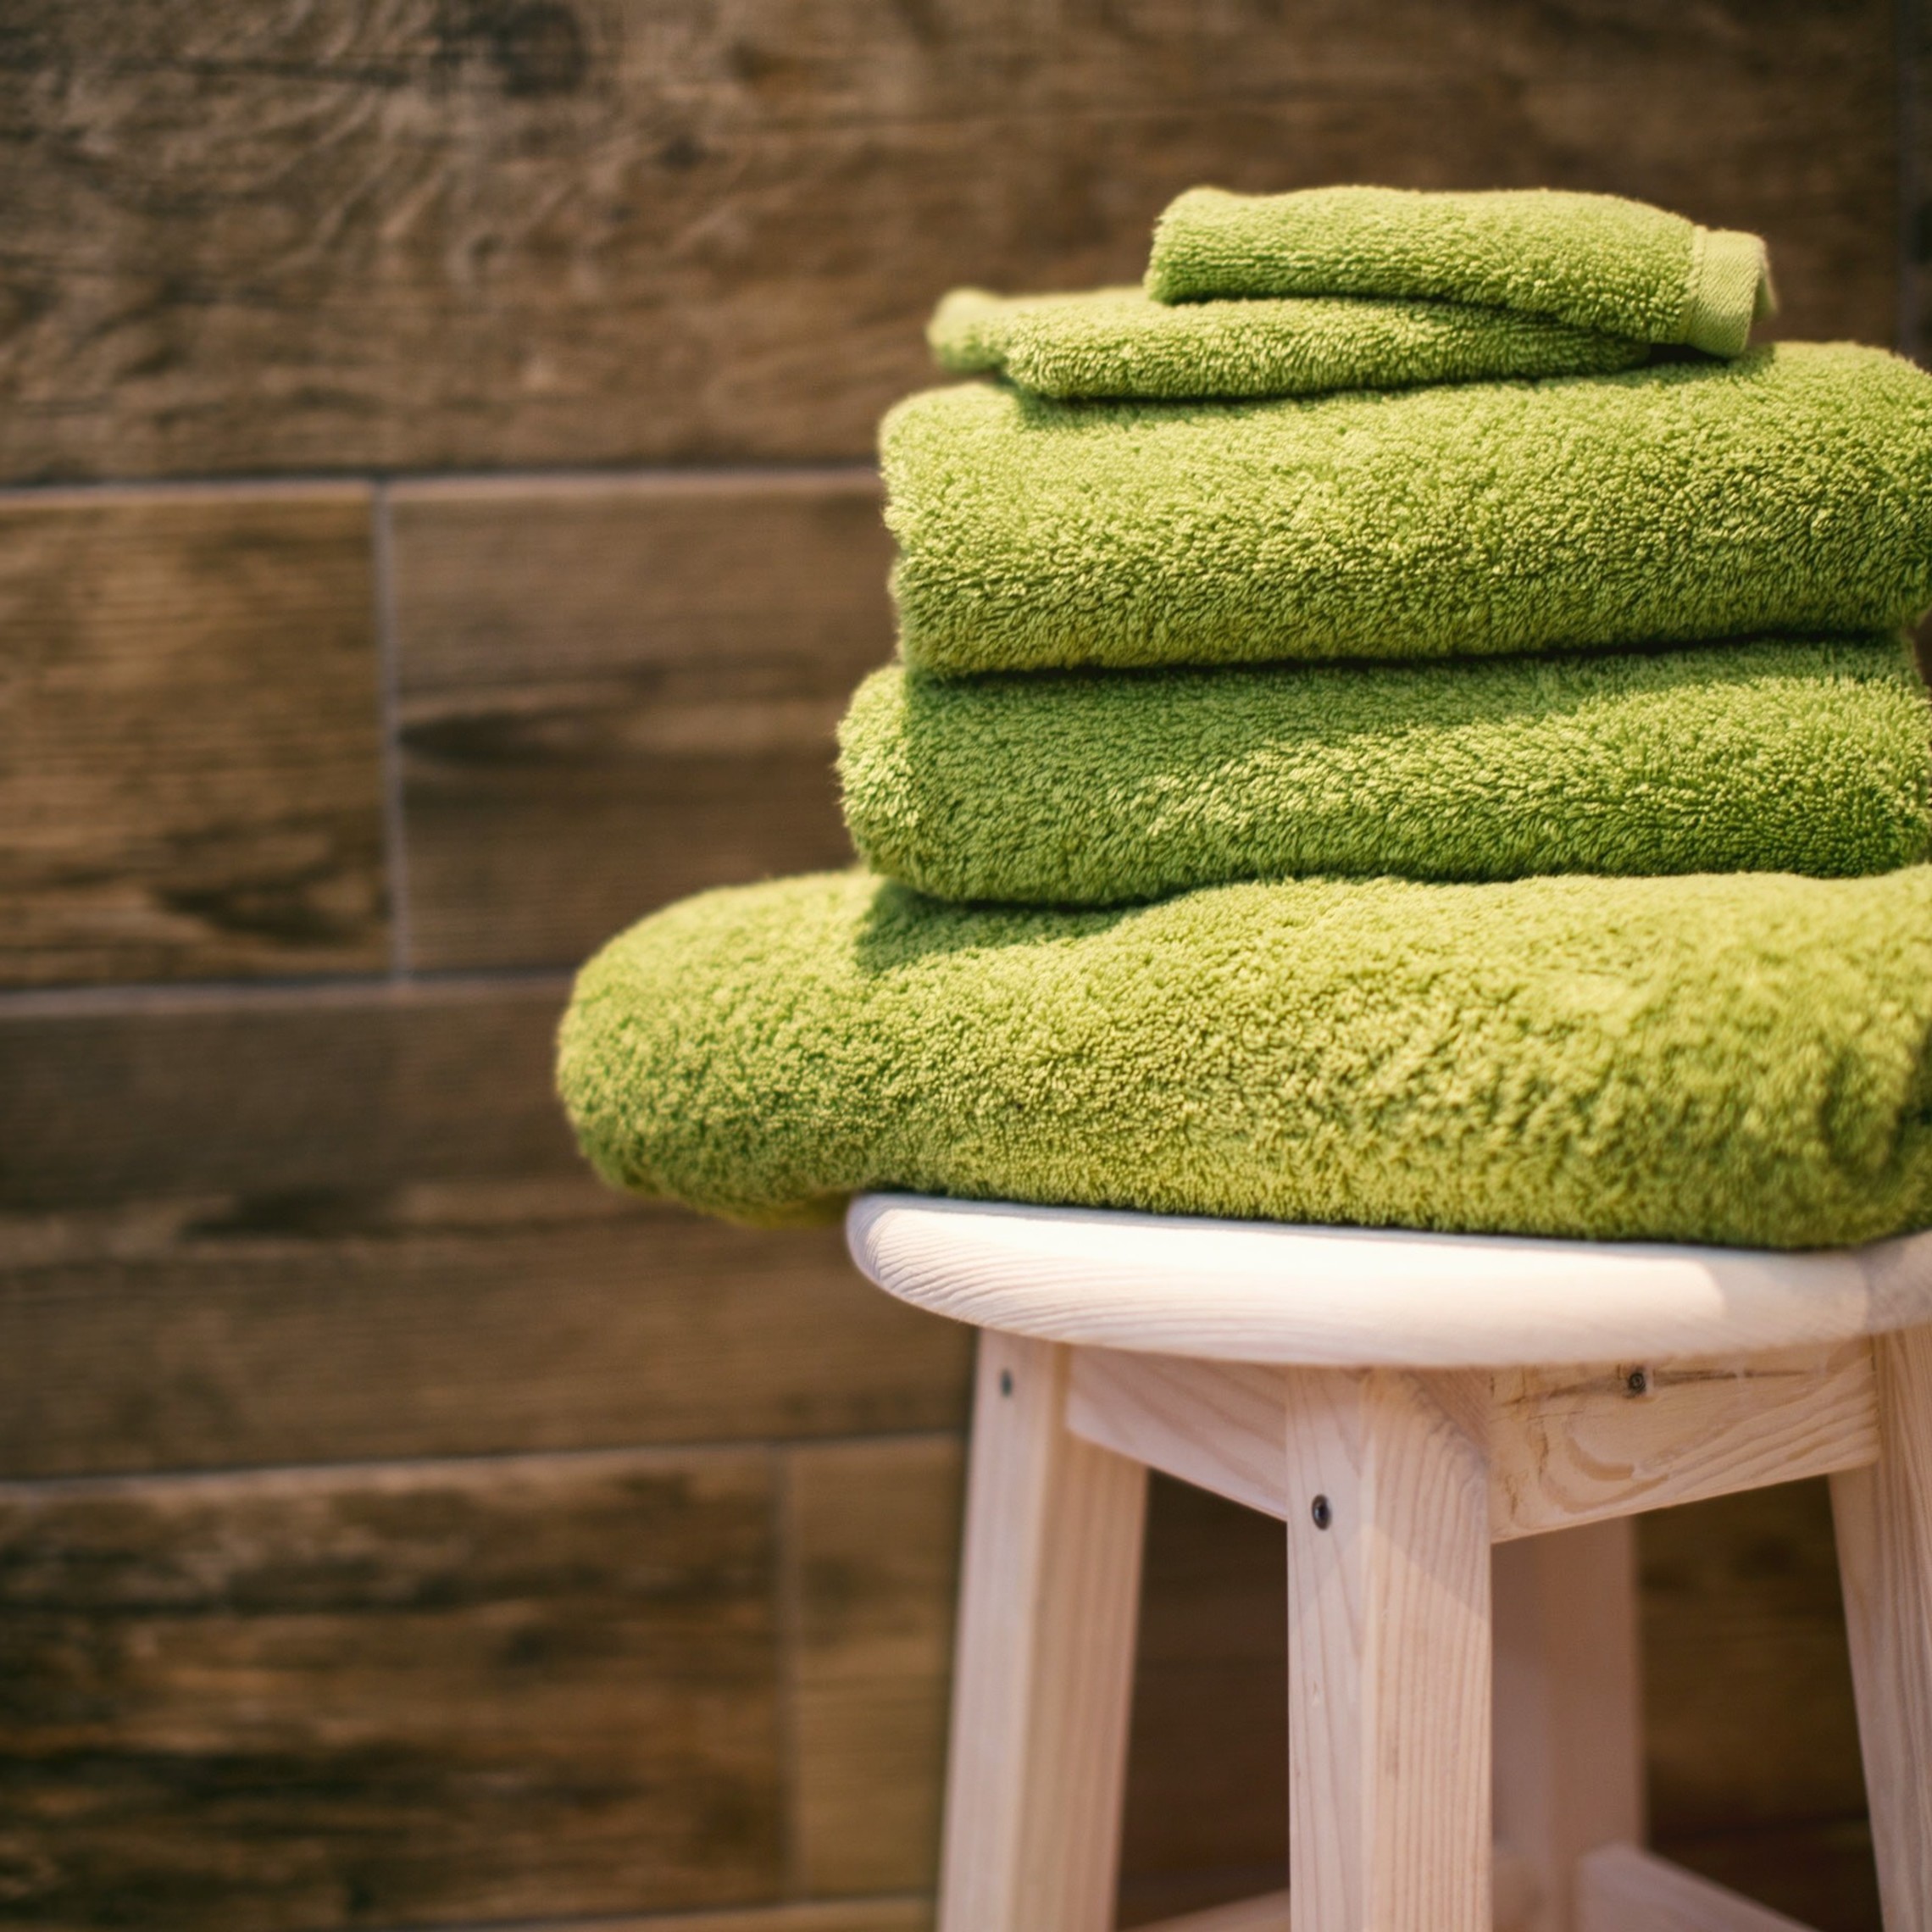 Towels on a stool in a sauna